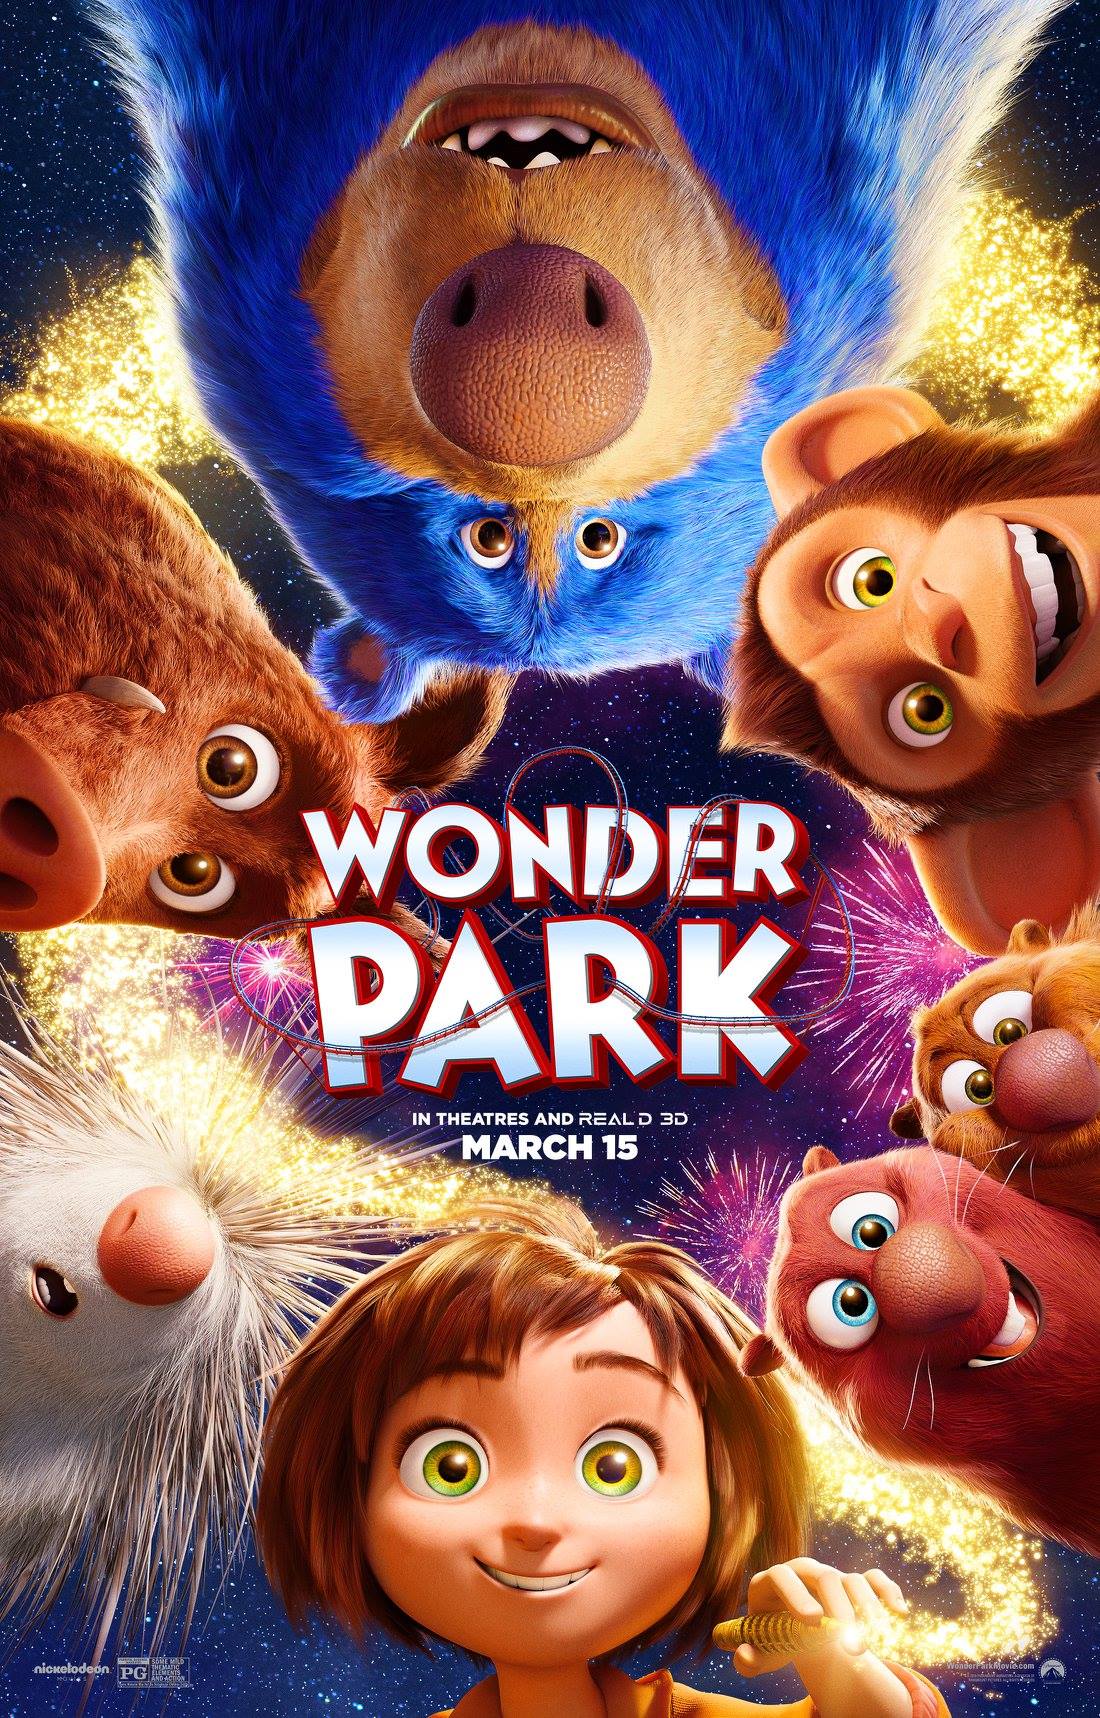 Watch the WONDER PARK Trailer, a fun family film in theaters on March 15! WONDER PARK is fun, creative, full of imagination, and must-see family film! The film encourages kids to be creative and use their imagination which is something I try to do as a mom.